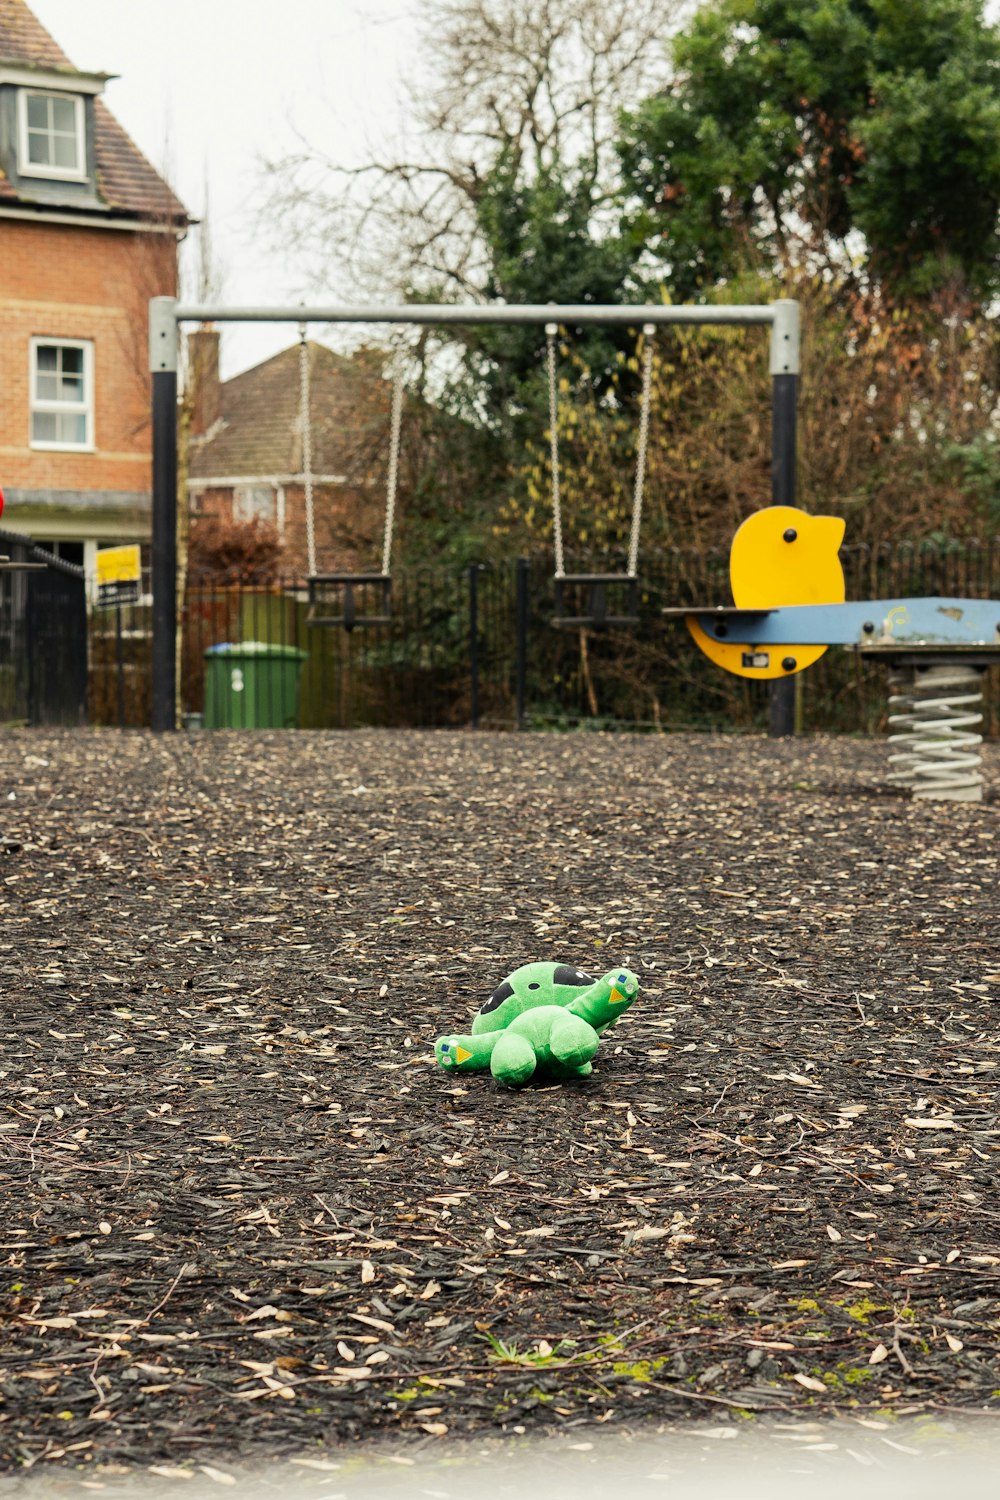 a green teddy bear laying on the ground in a park